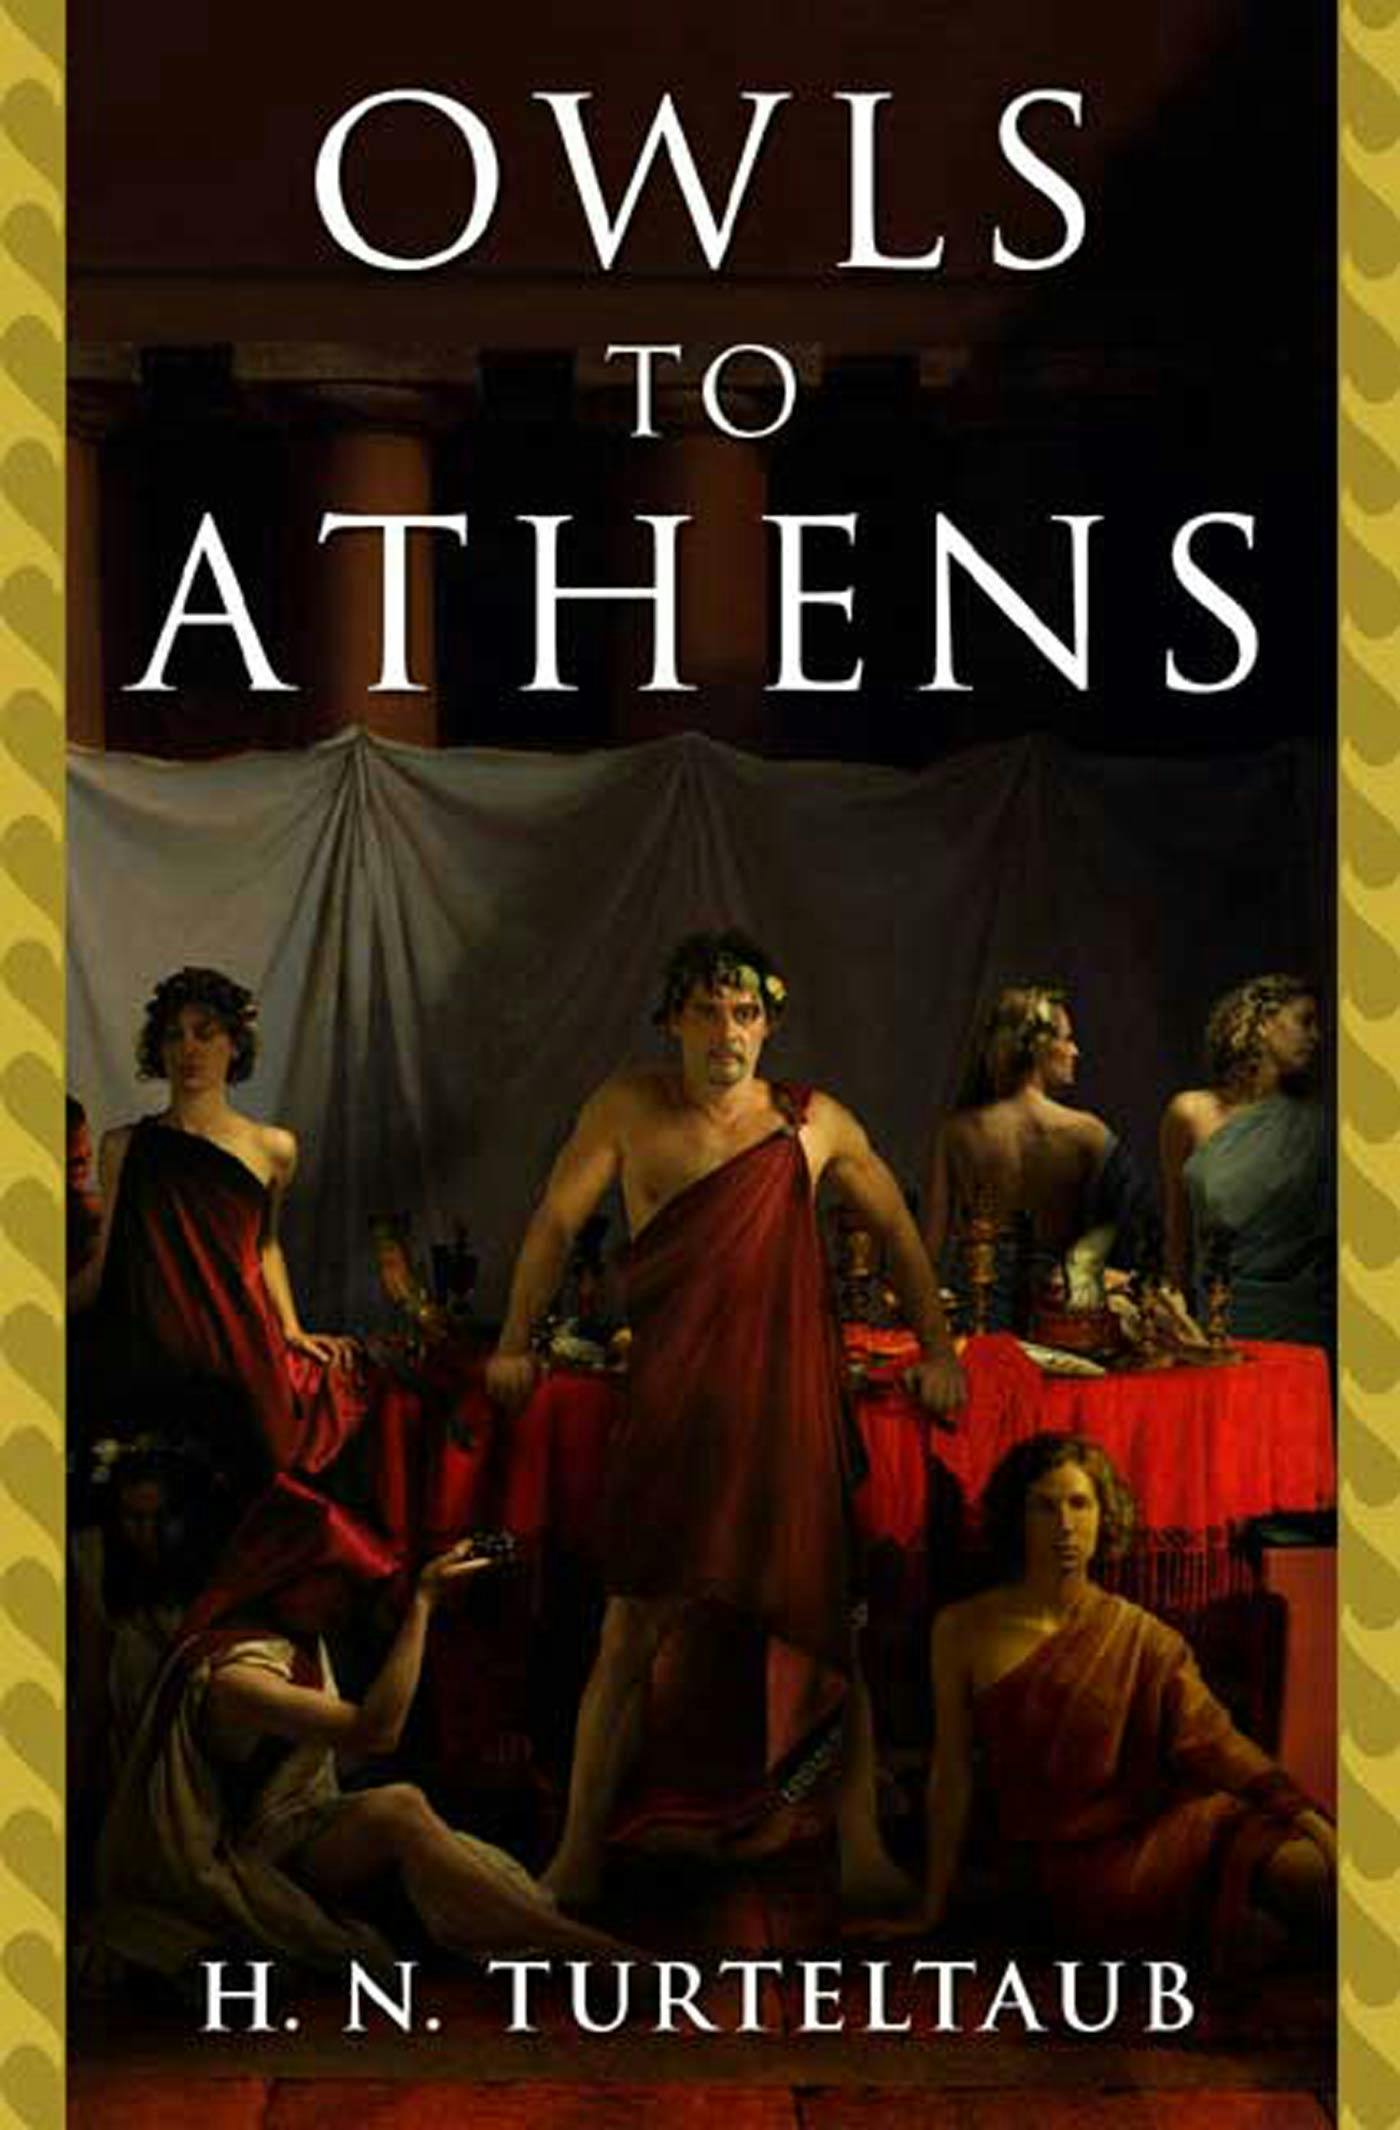 Cover for the book titled as: Owls to Athens